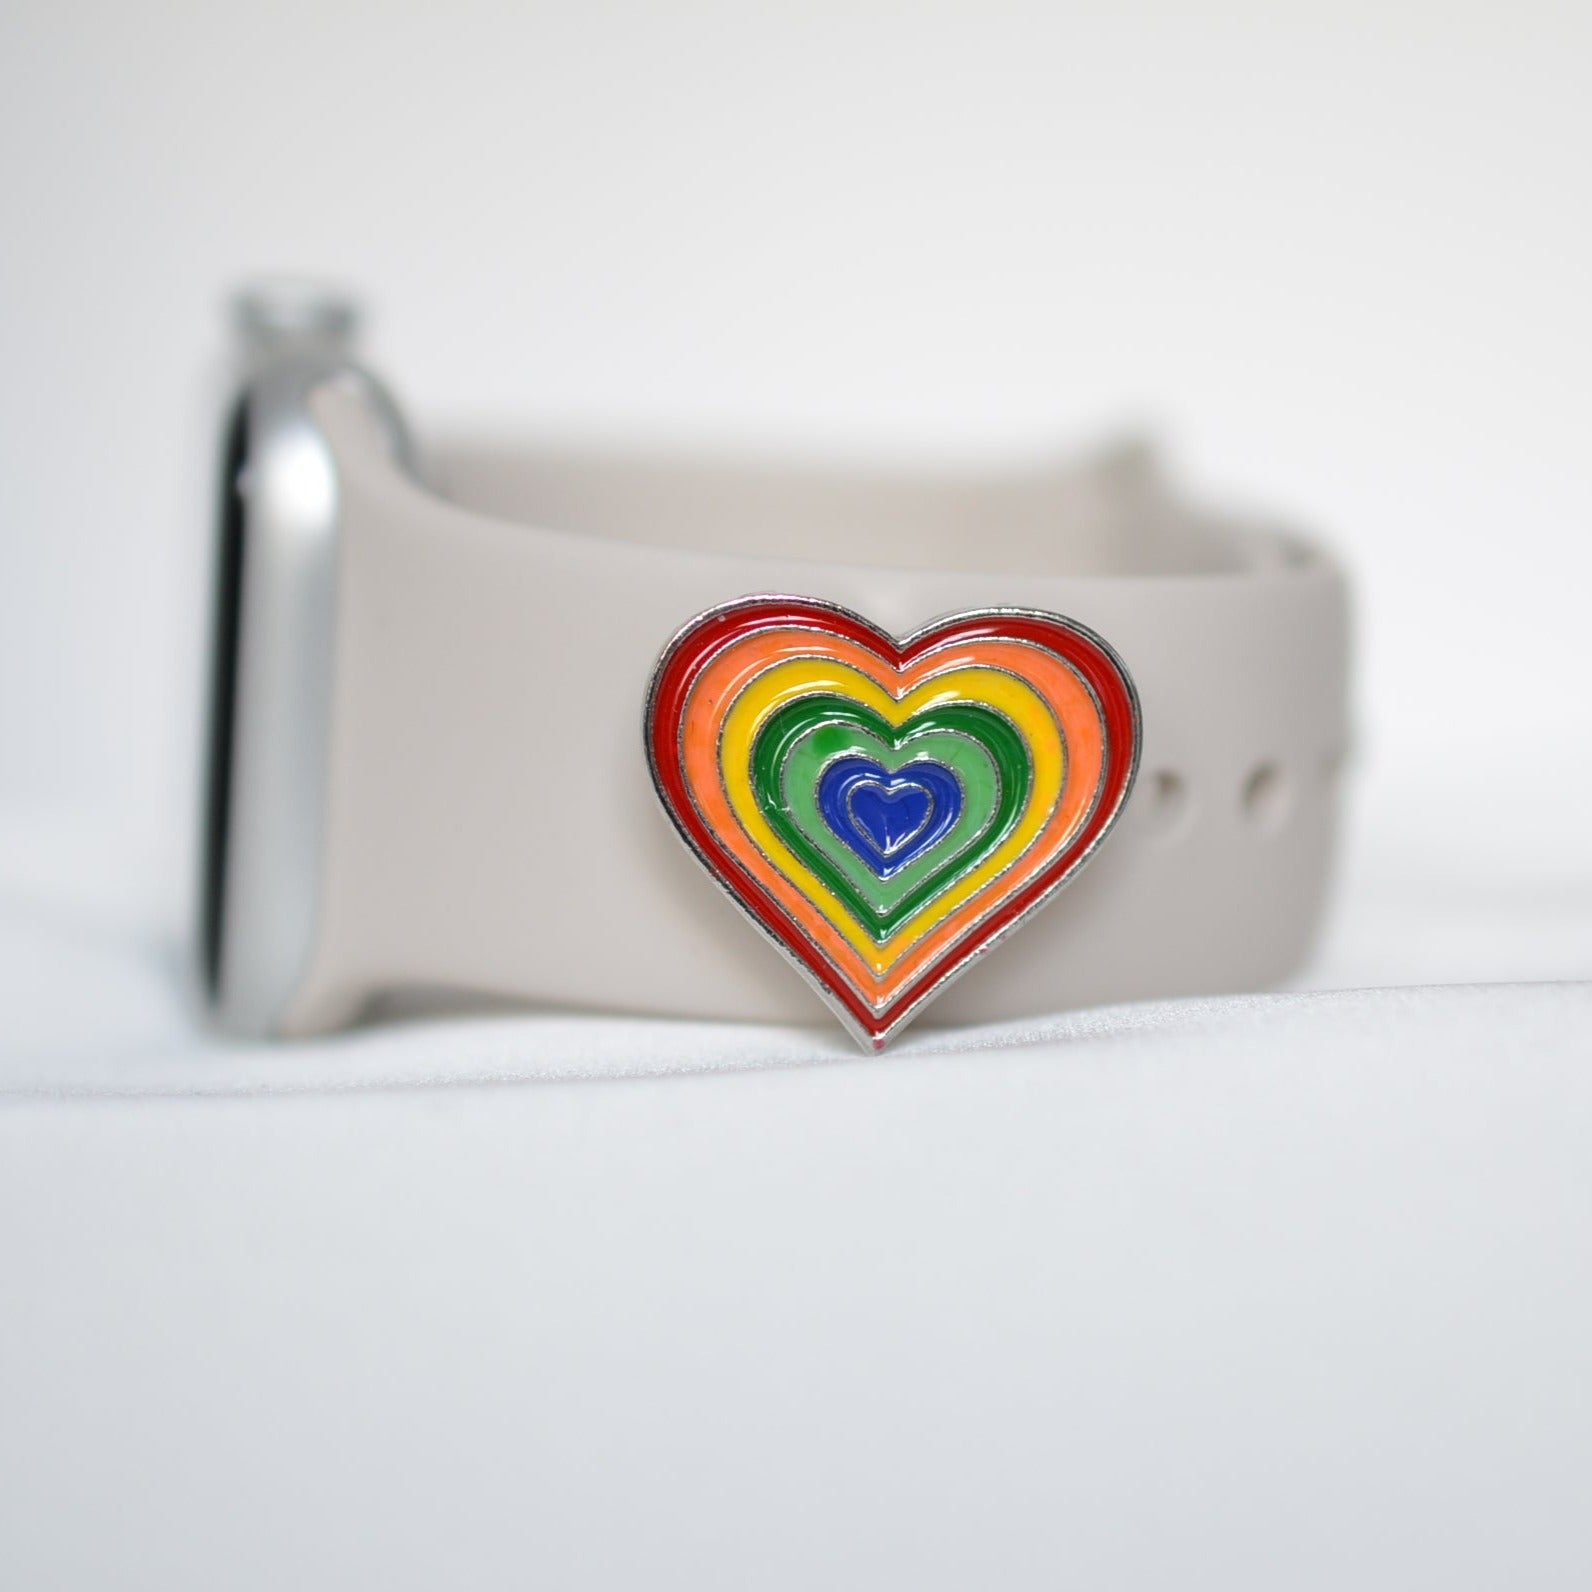 Rainbow, LGBTQ, Gay Pride Heart Charm for Belts, Bags and Watch Bands